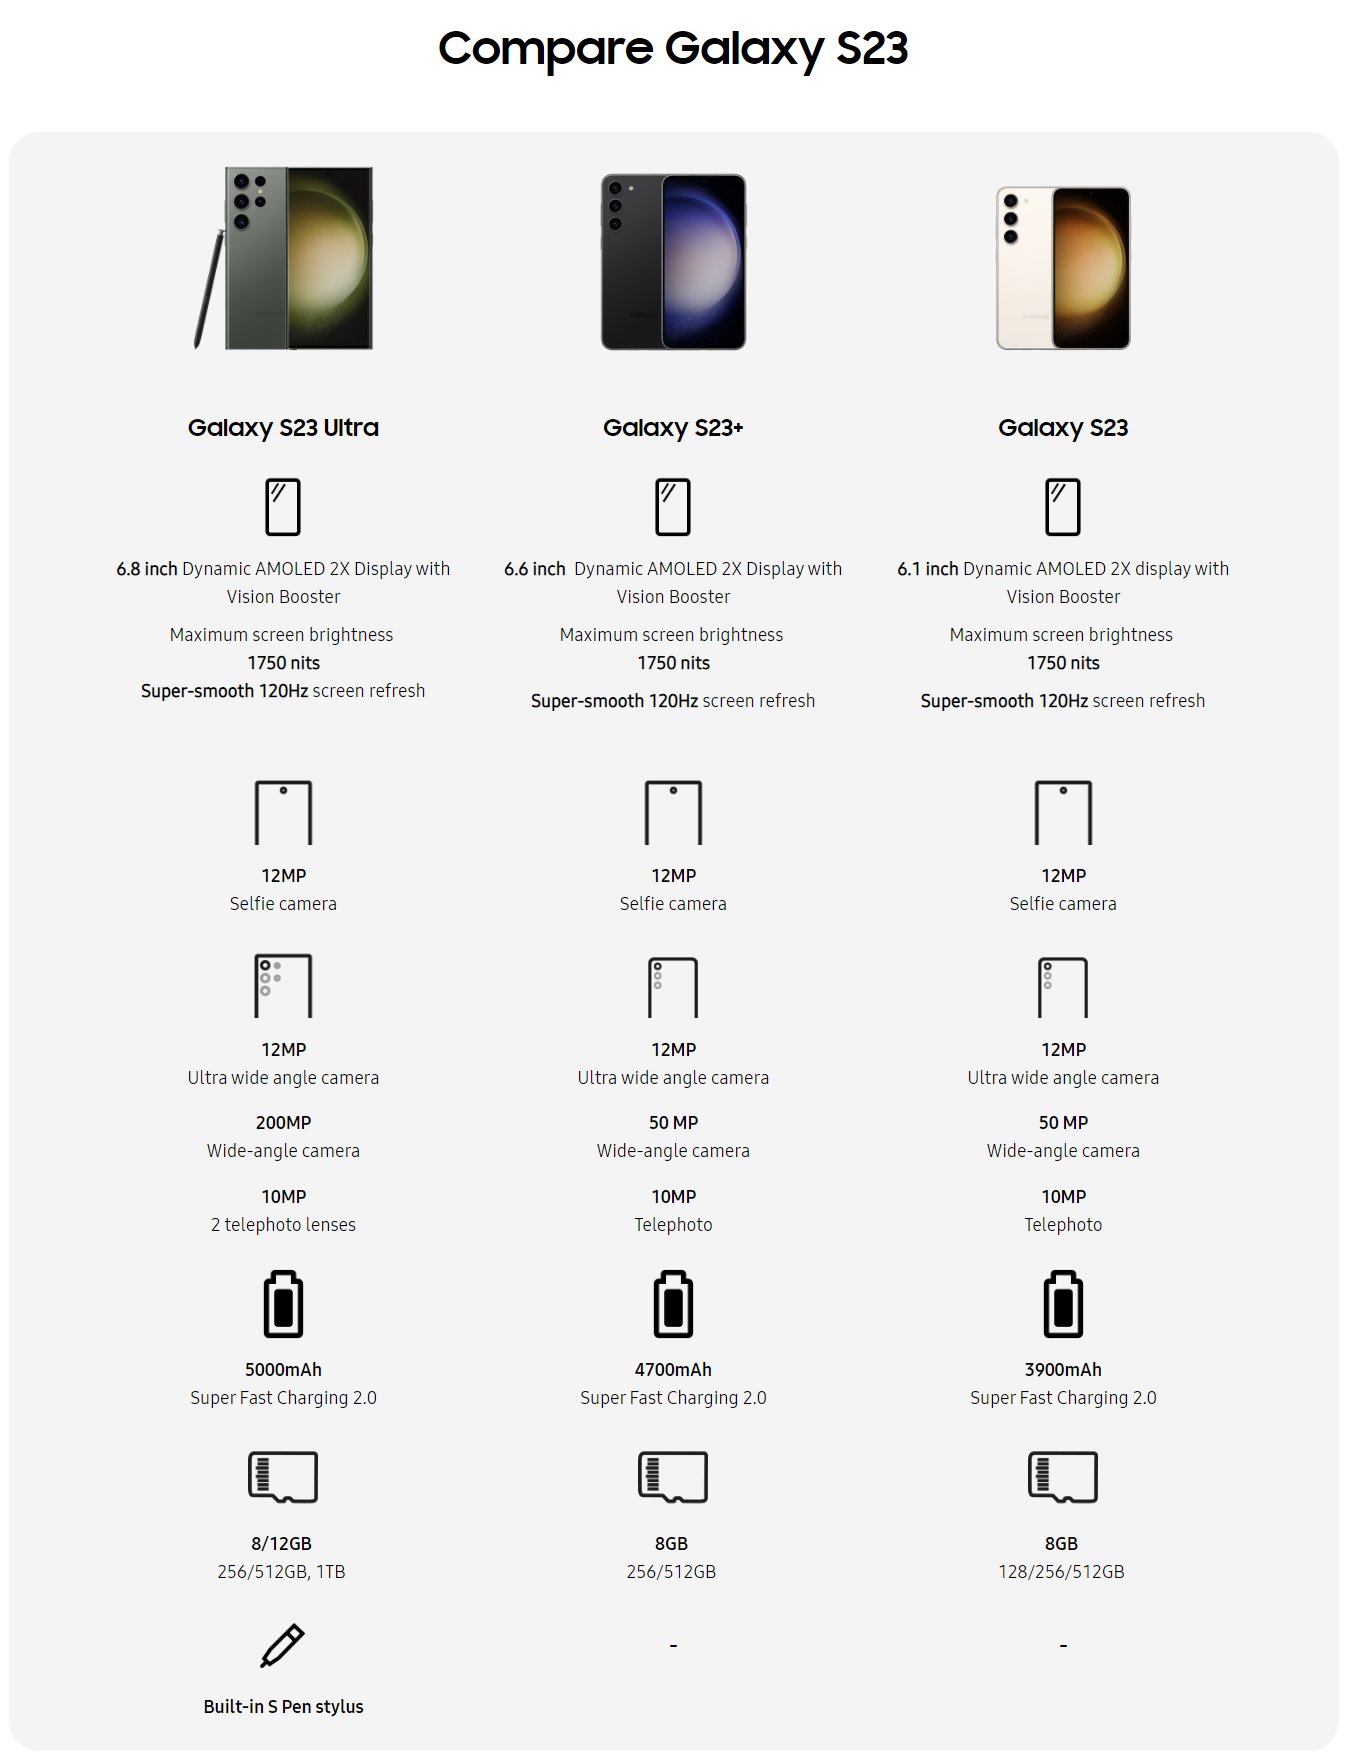 The purported specs of all three Samsung Galaxy S23 handsets